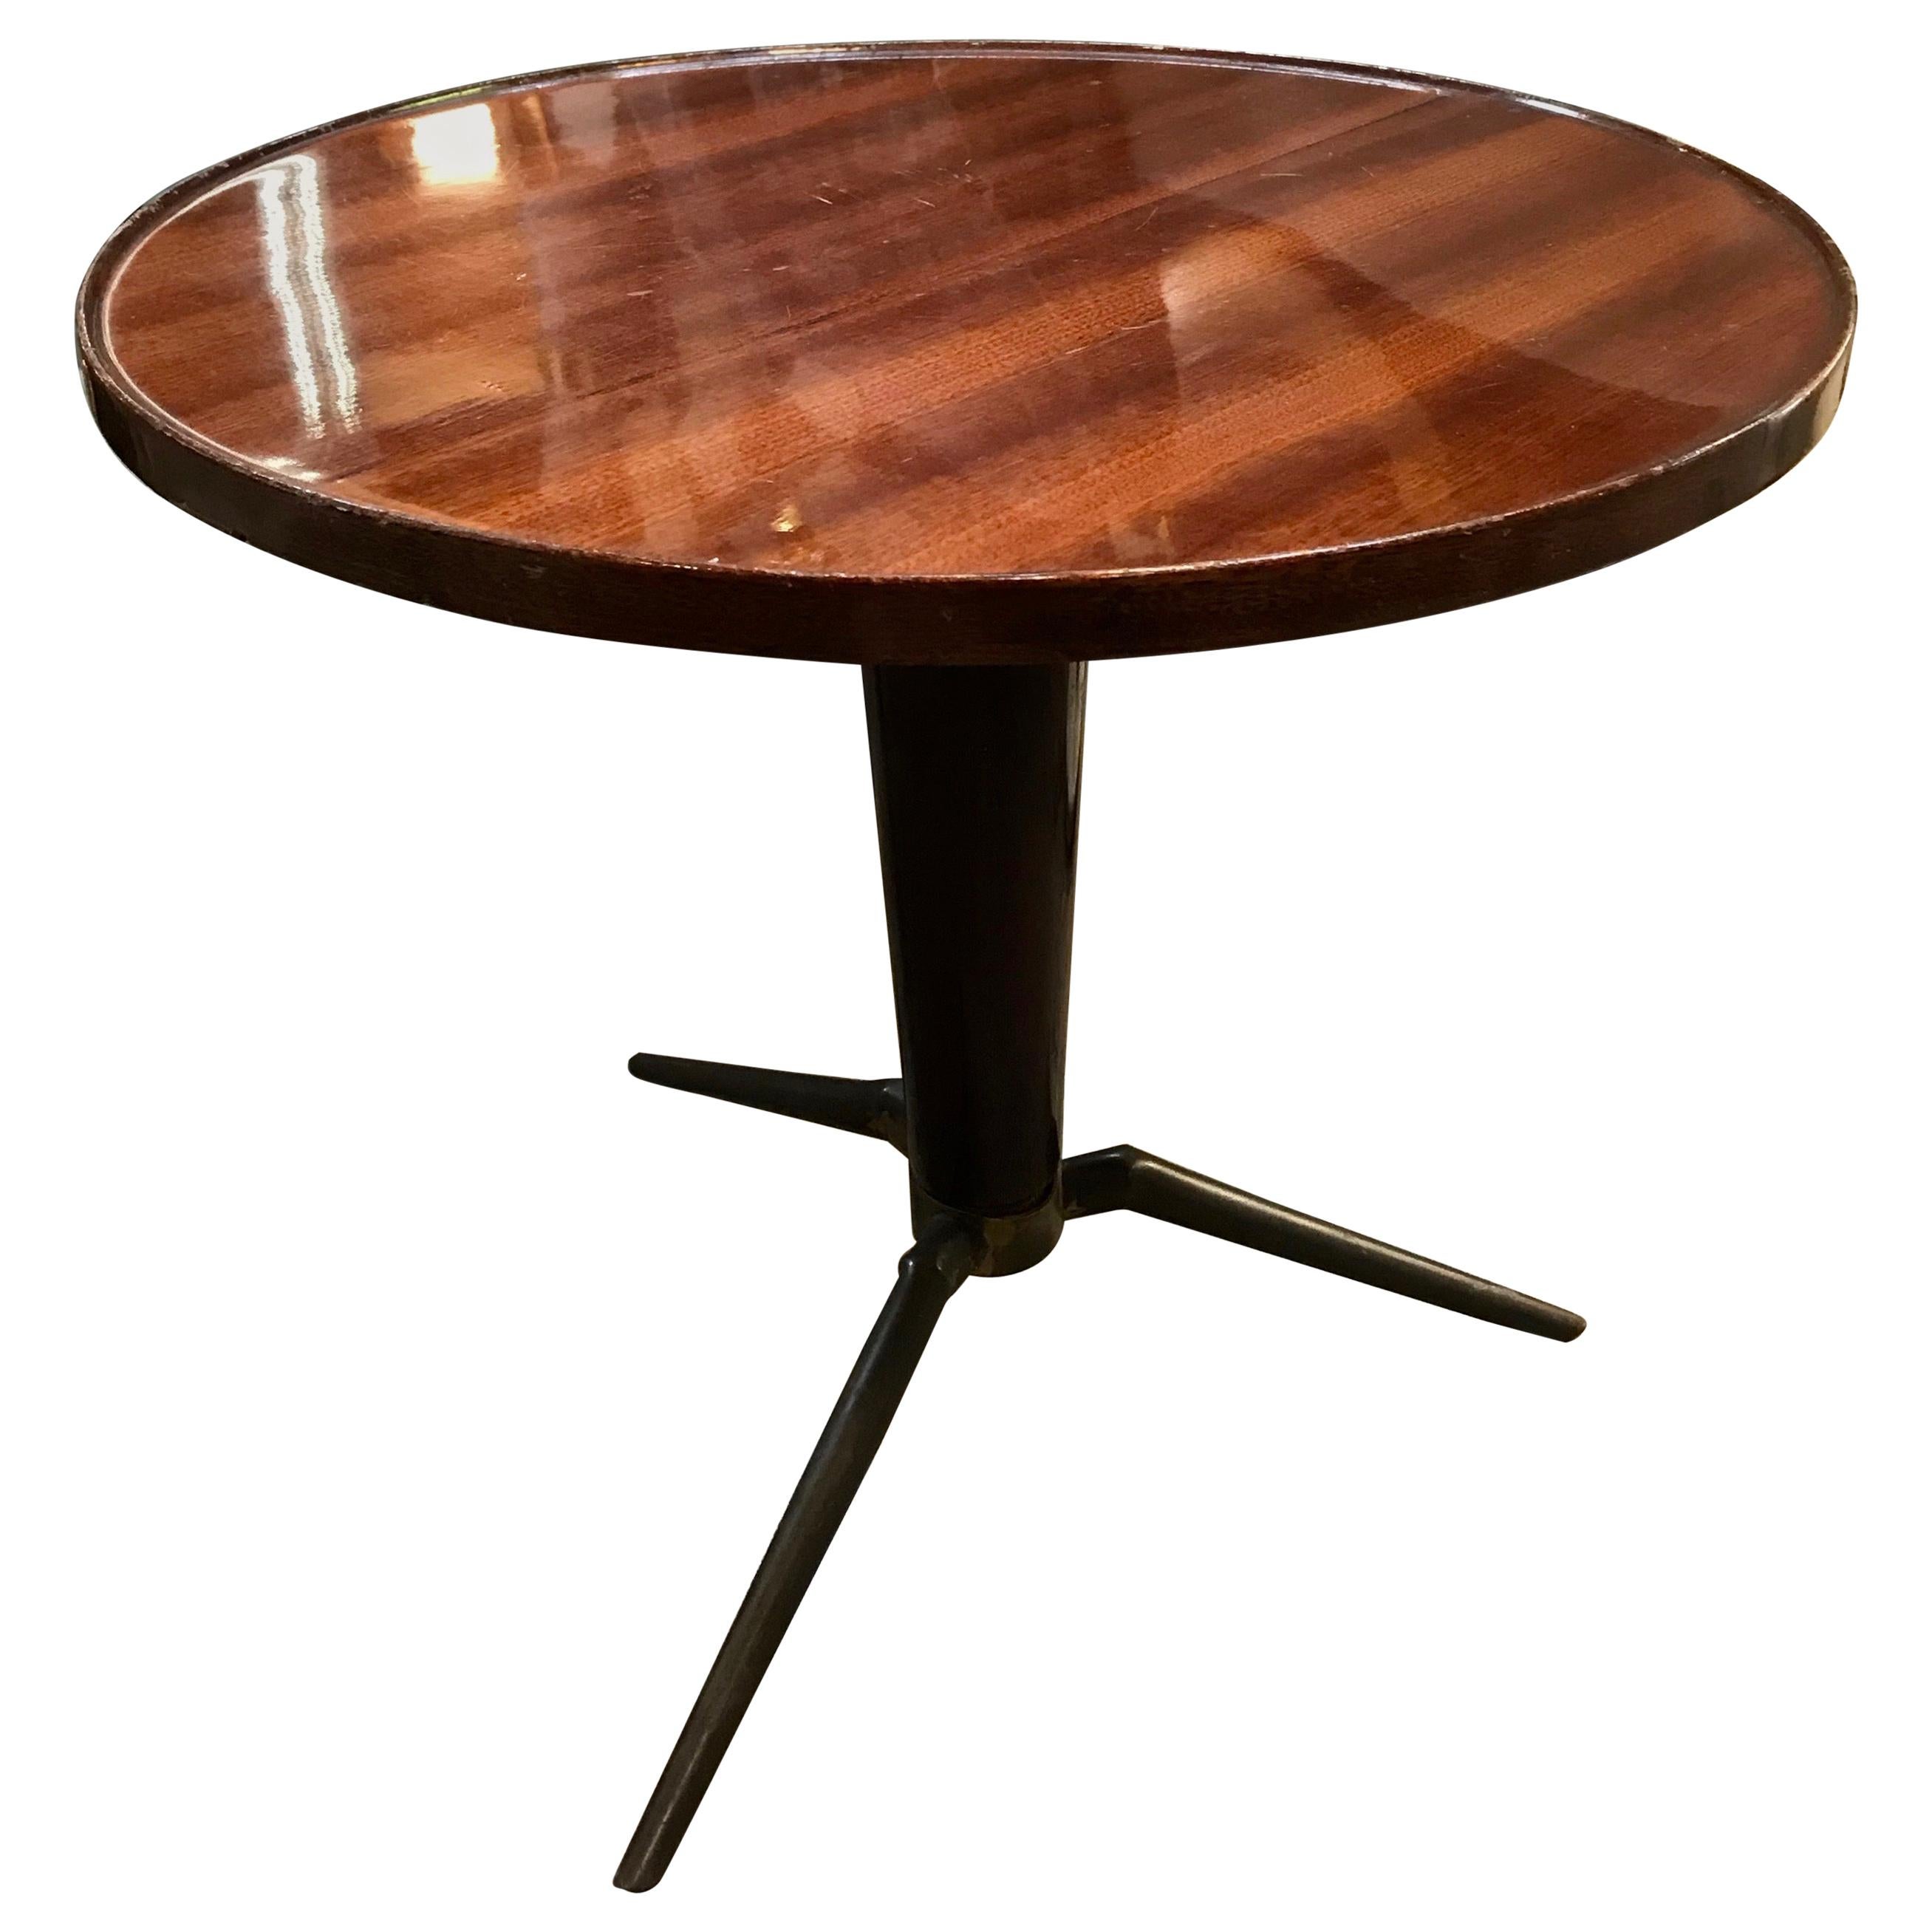 Midcentury Italian Round Coffee/Side Table in Wood and Brass, 1960s